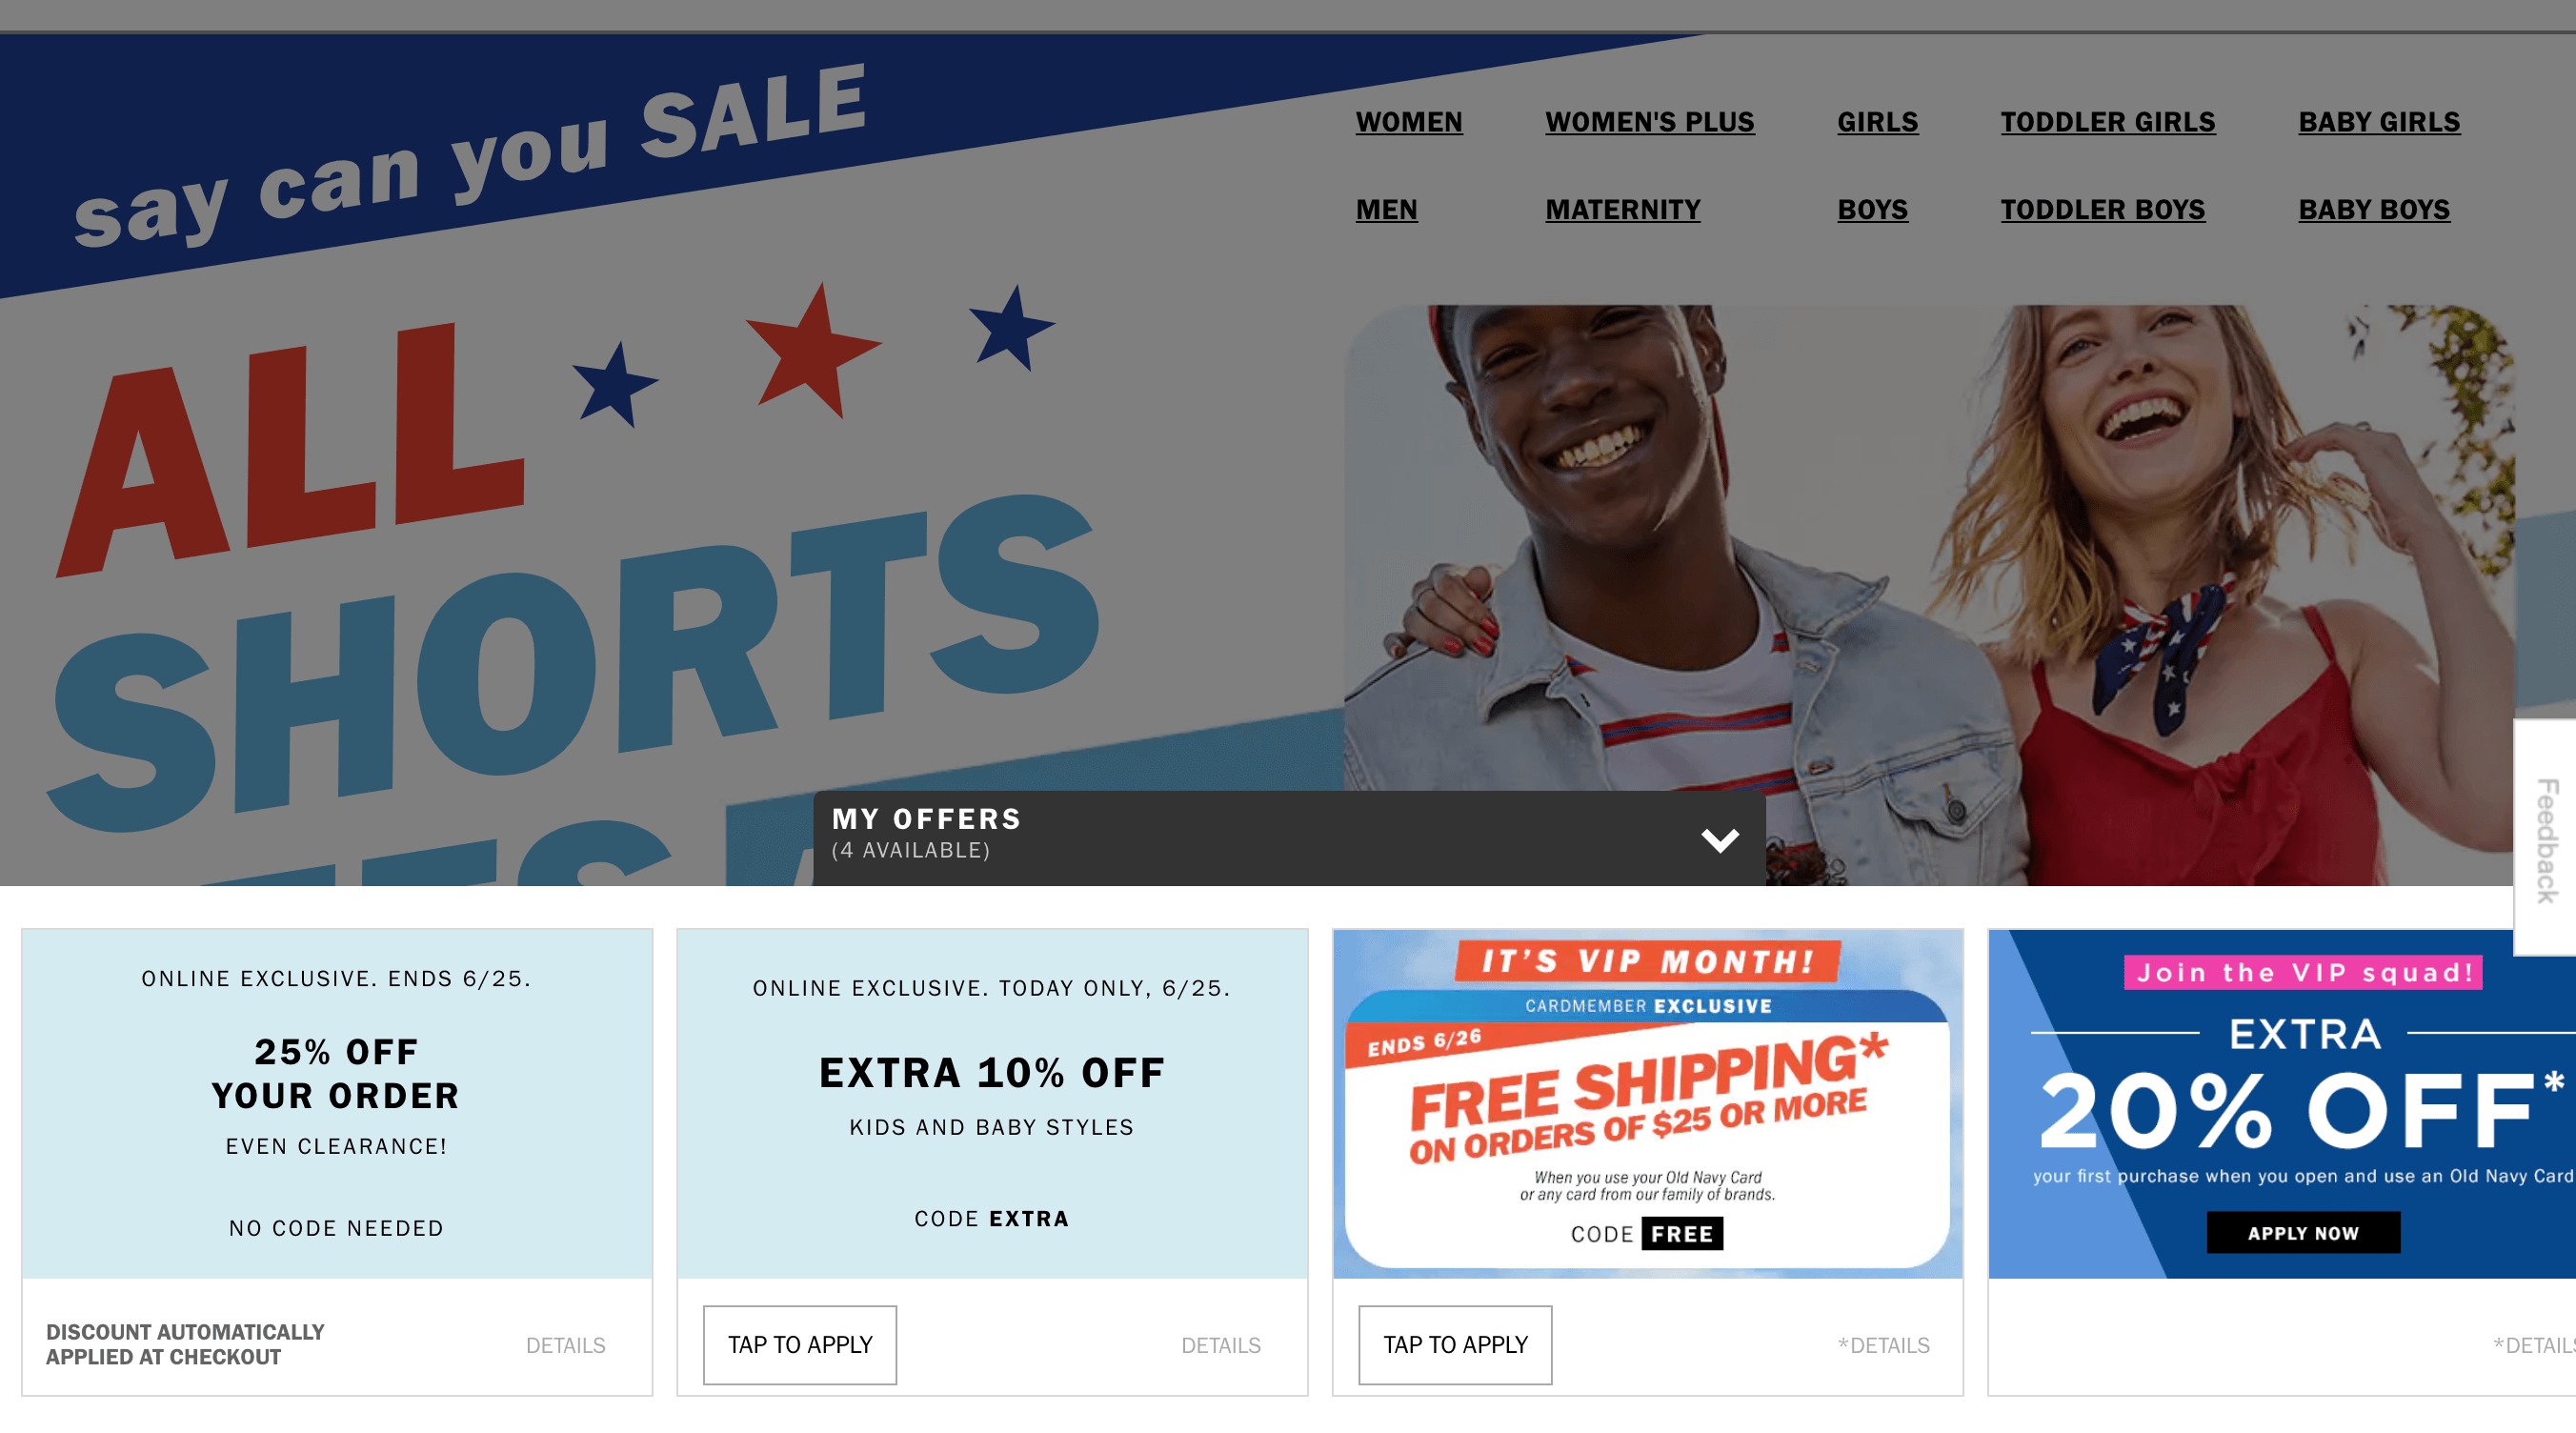 Old Navy's promo code UX lets users view deals from any website page so they can easily understand how to qualify for a promotion